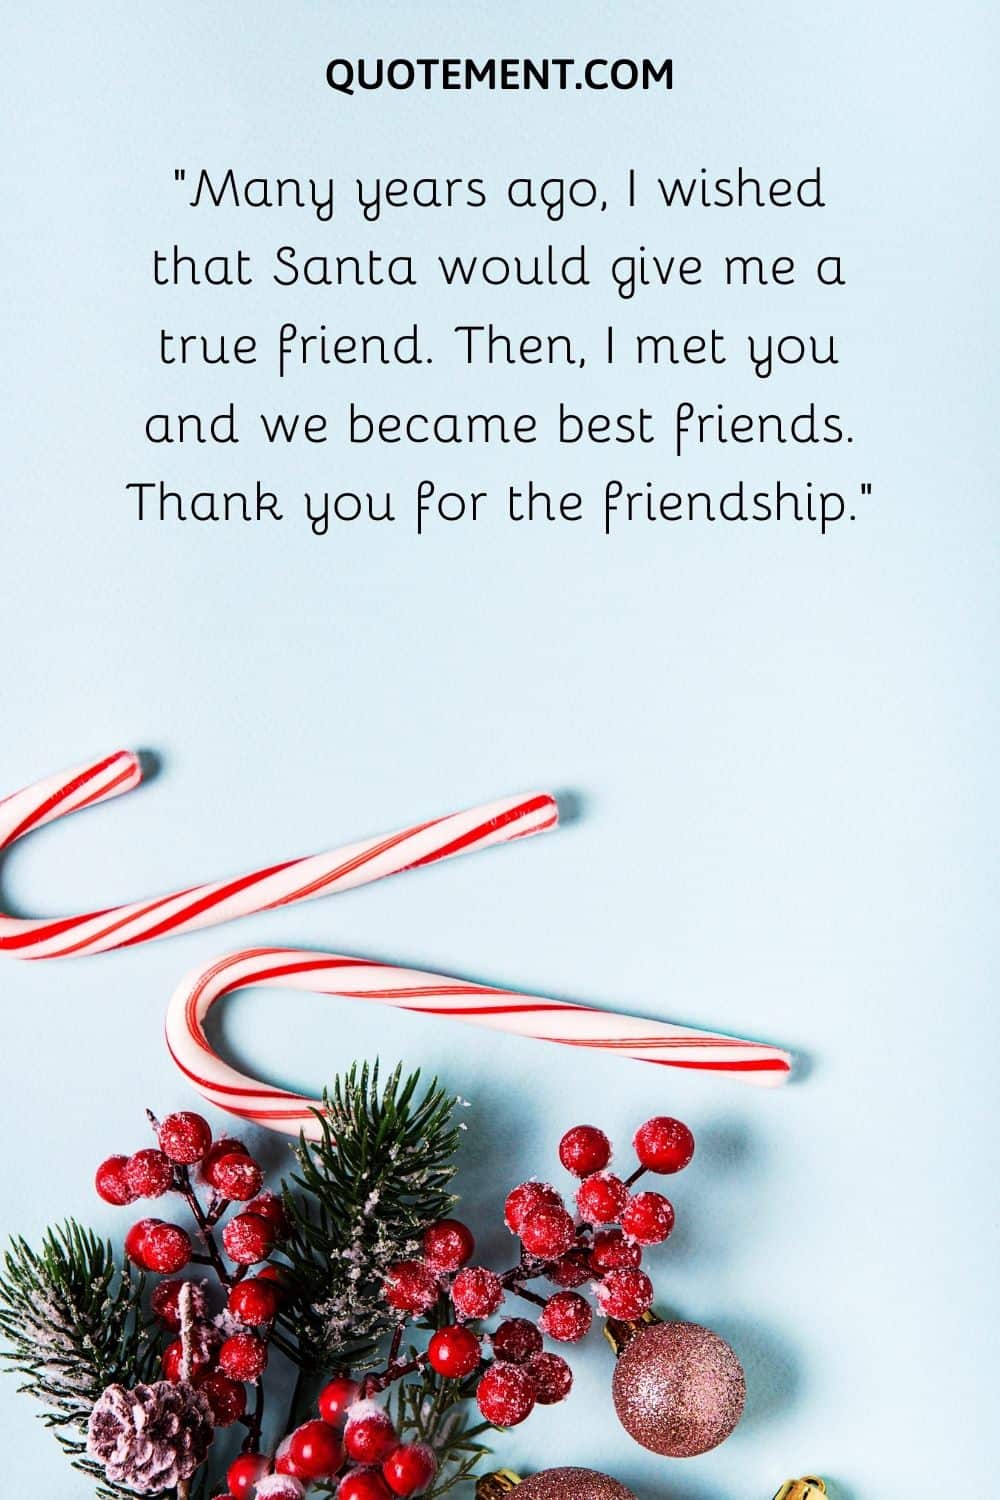 I wished that Santa would give me a true friend